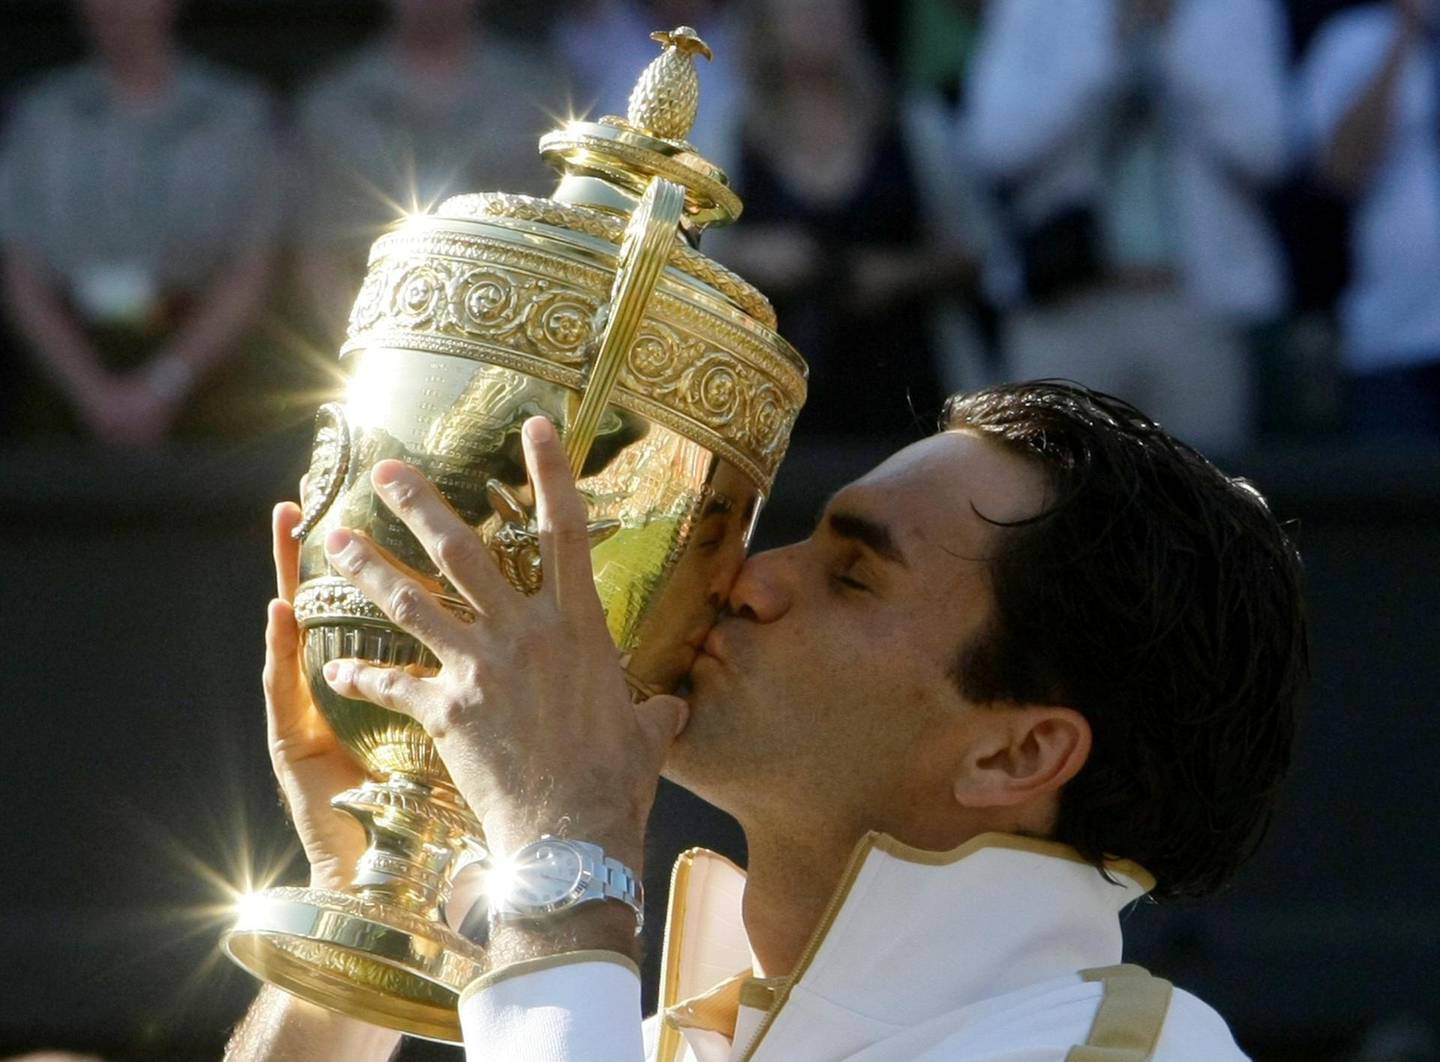 FILE PHOTO: Roger Federer of Switzerland kisses his trophy after defeating Andy Roddick of the U.S. in their Gentlemen's Singles finals match at the Wimbledon tennis championships in London, July 5, 2009.   REUTERS/Stefan Wermuth/File Photo